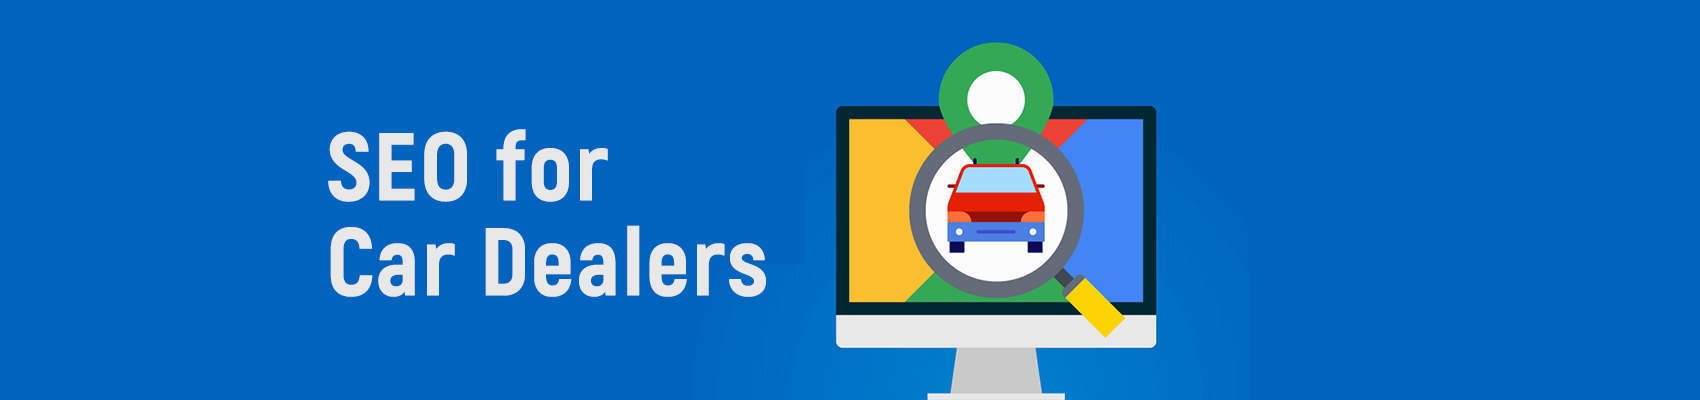 SEO Services for Car Dealers